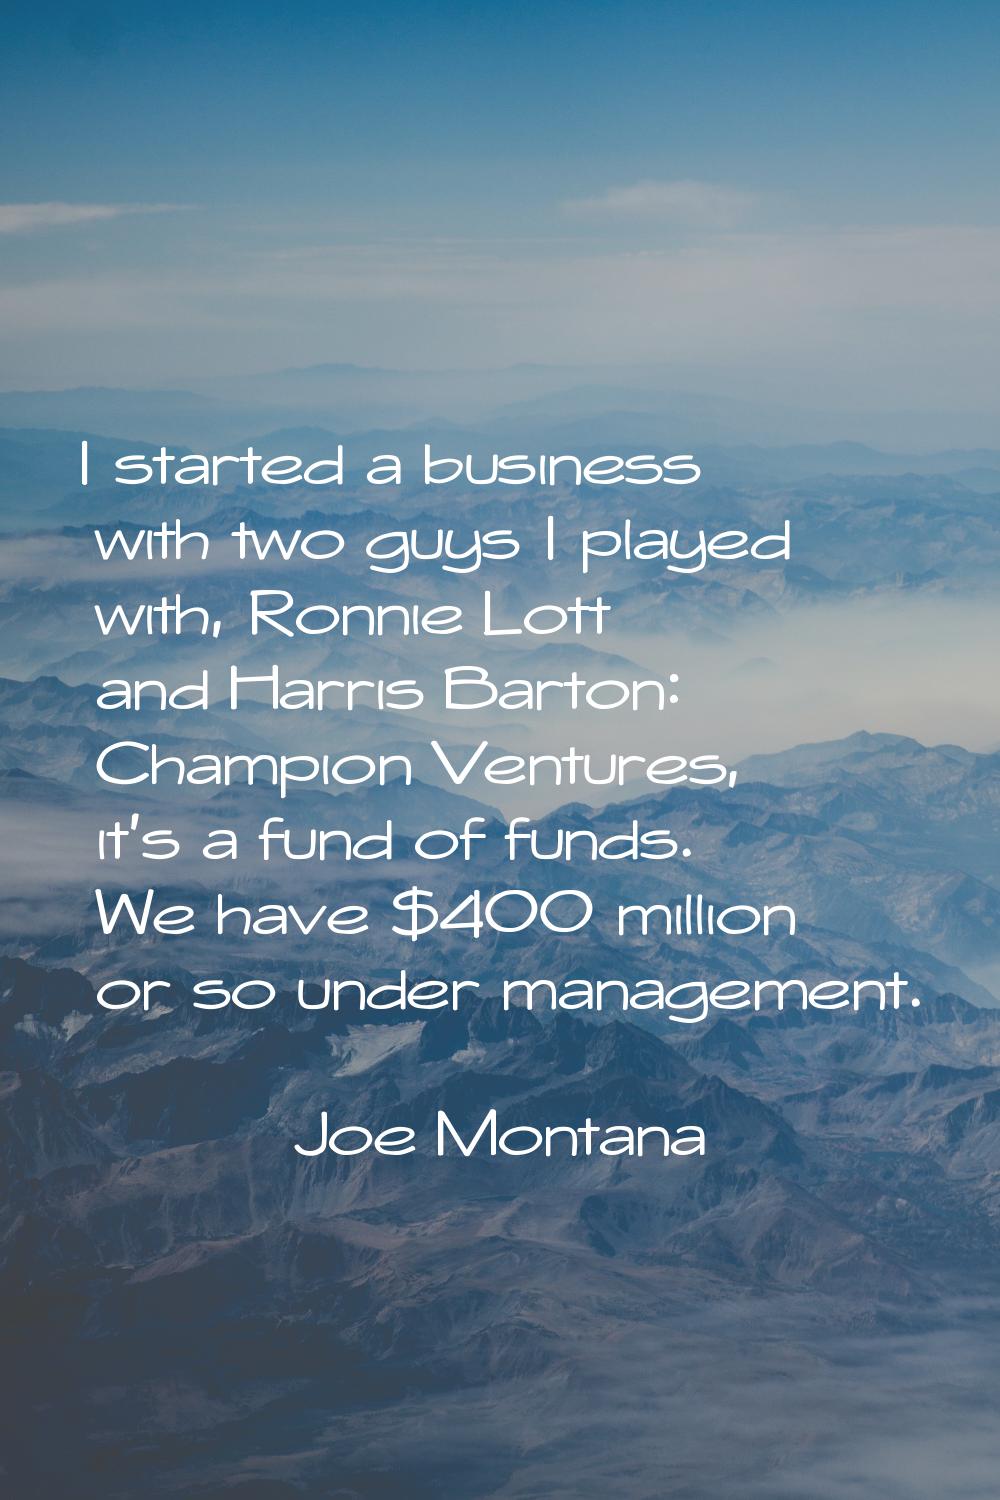 I started a business with two guys I played with, Ronnie Lott and Harris Barton: Champion Ventures,